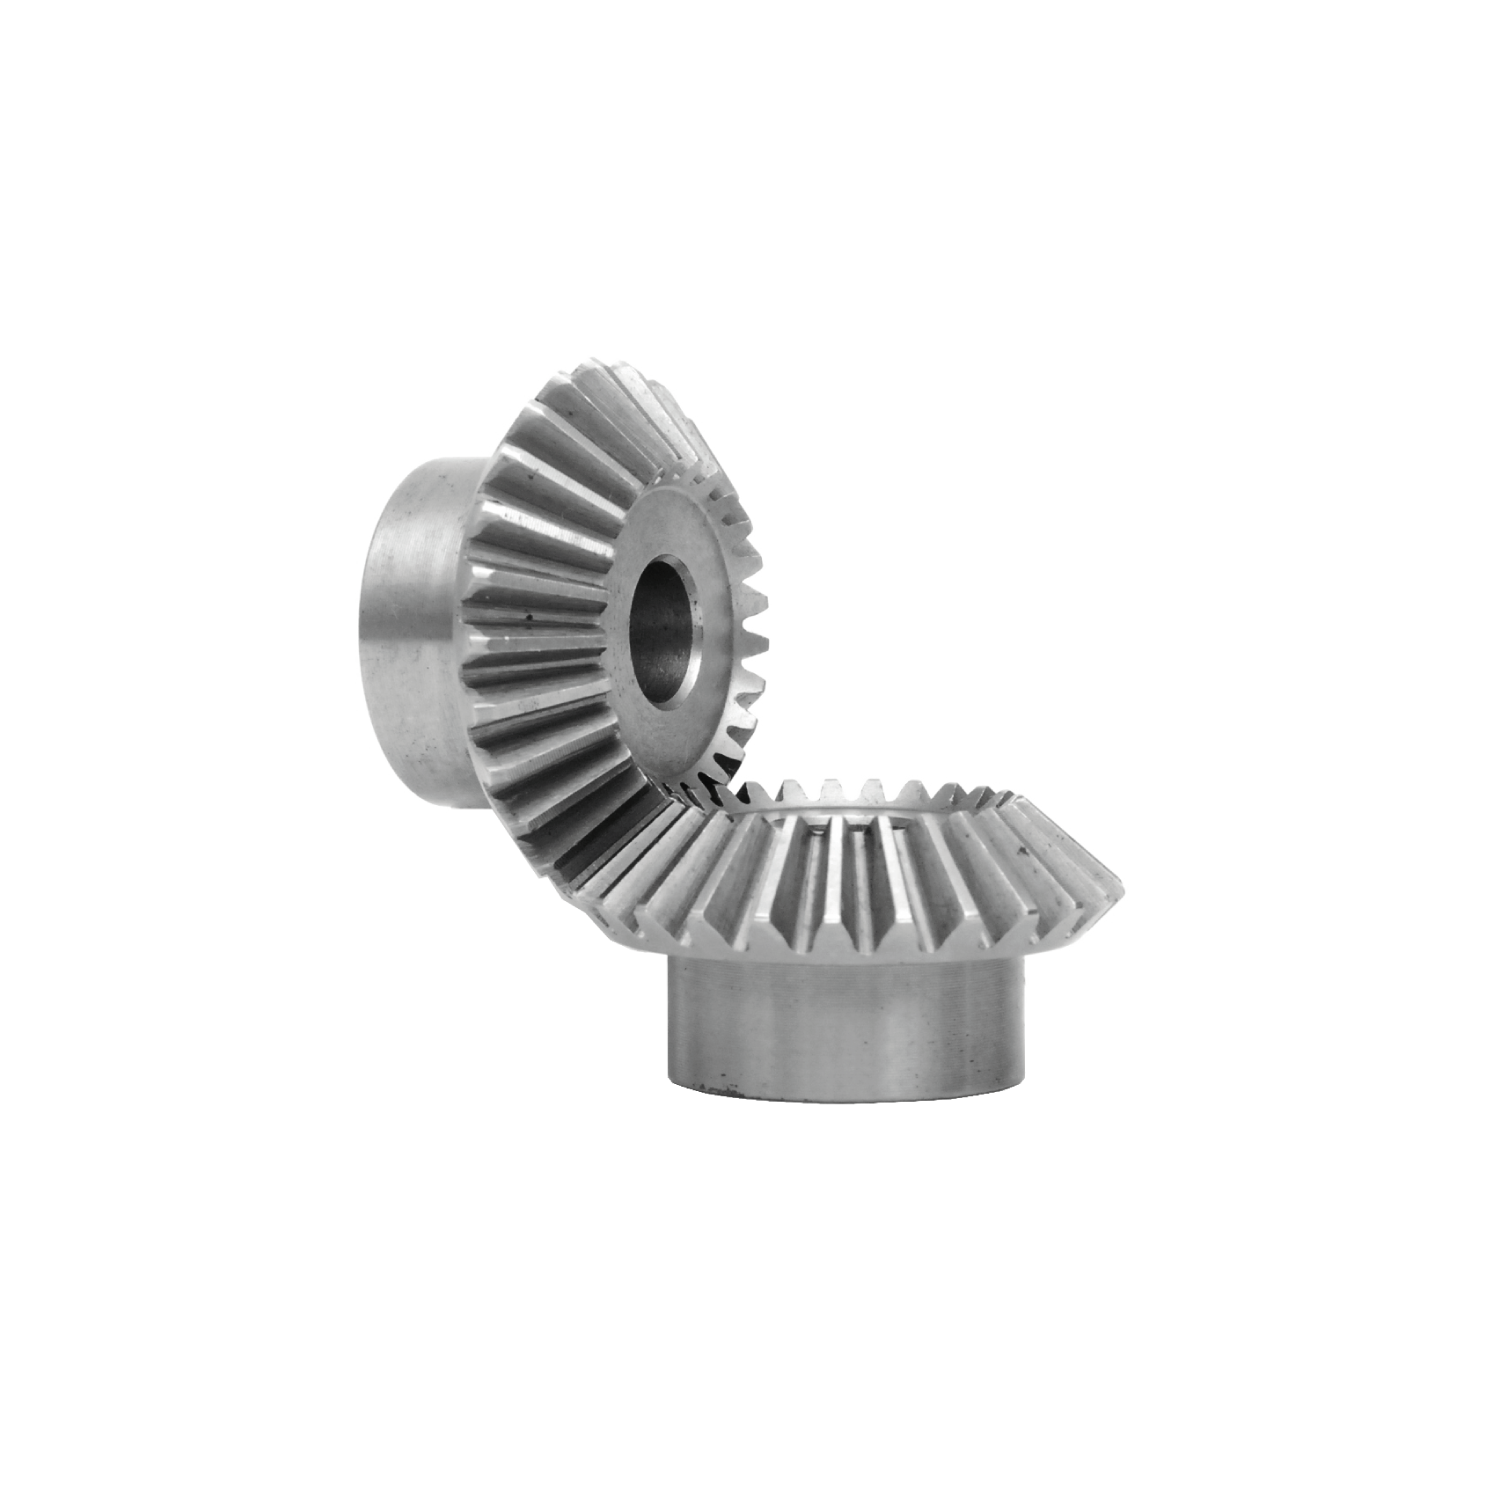 Straight-toothed bevel gear set